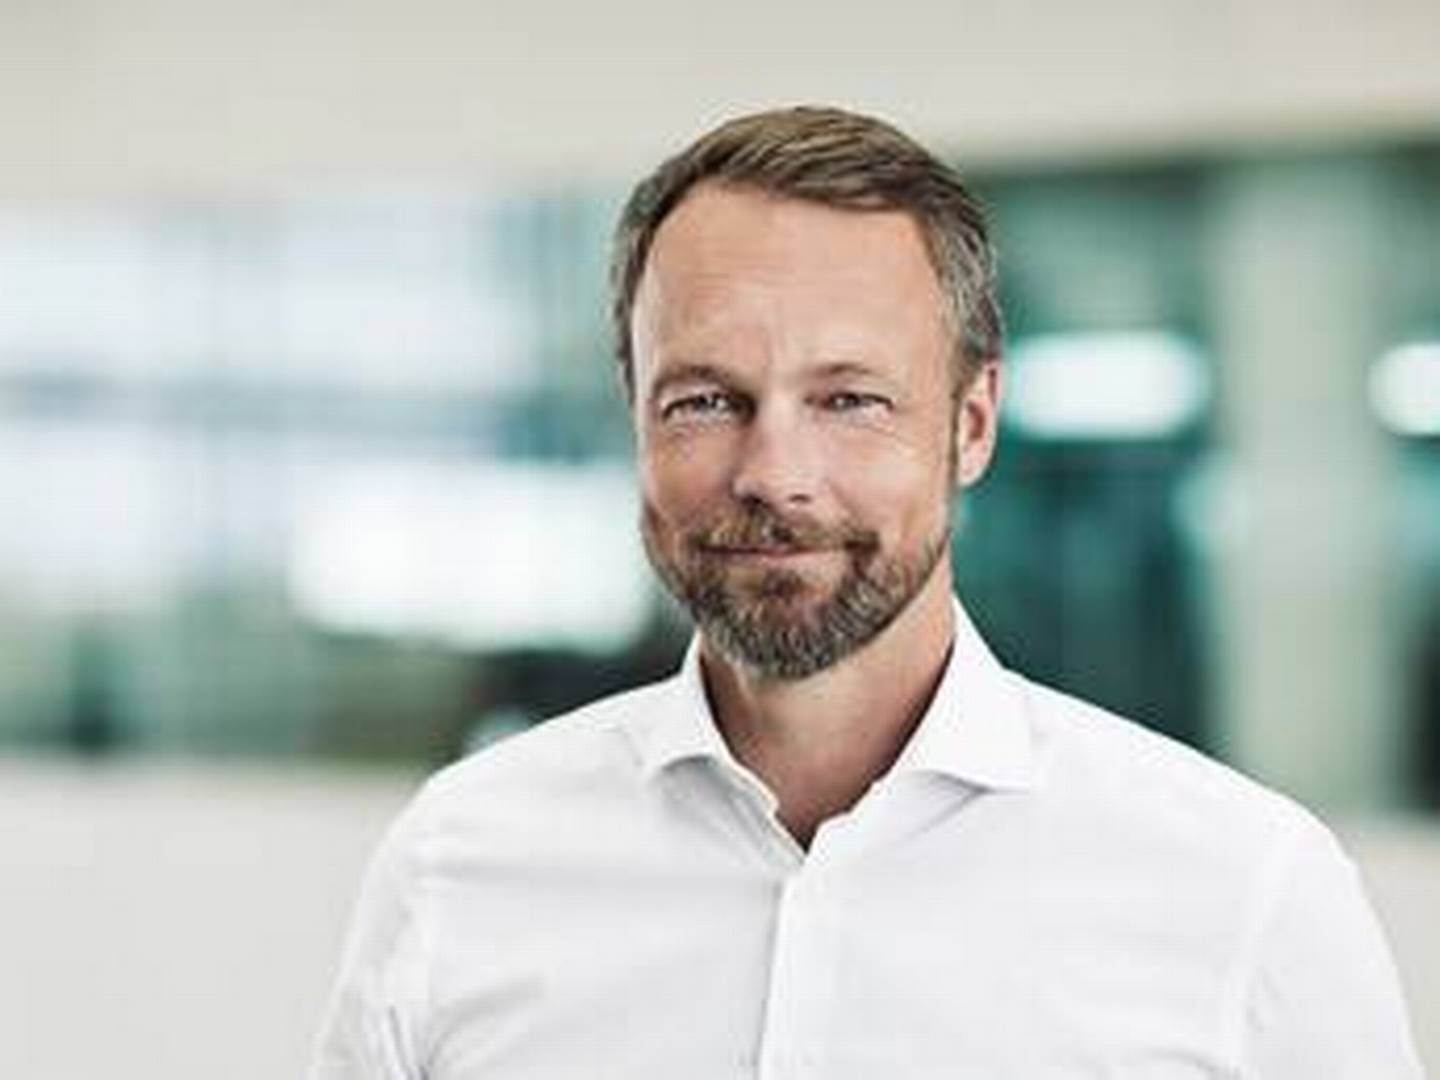 Peter Kjærgaard, chief investment officer and head of Nykredit wealth management. | Photo: PR/nykredit